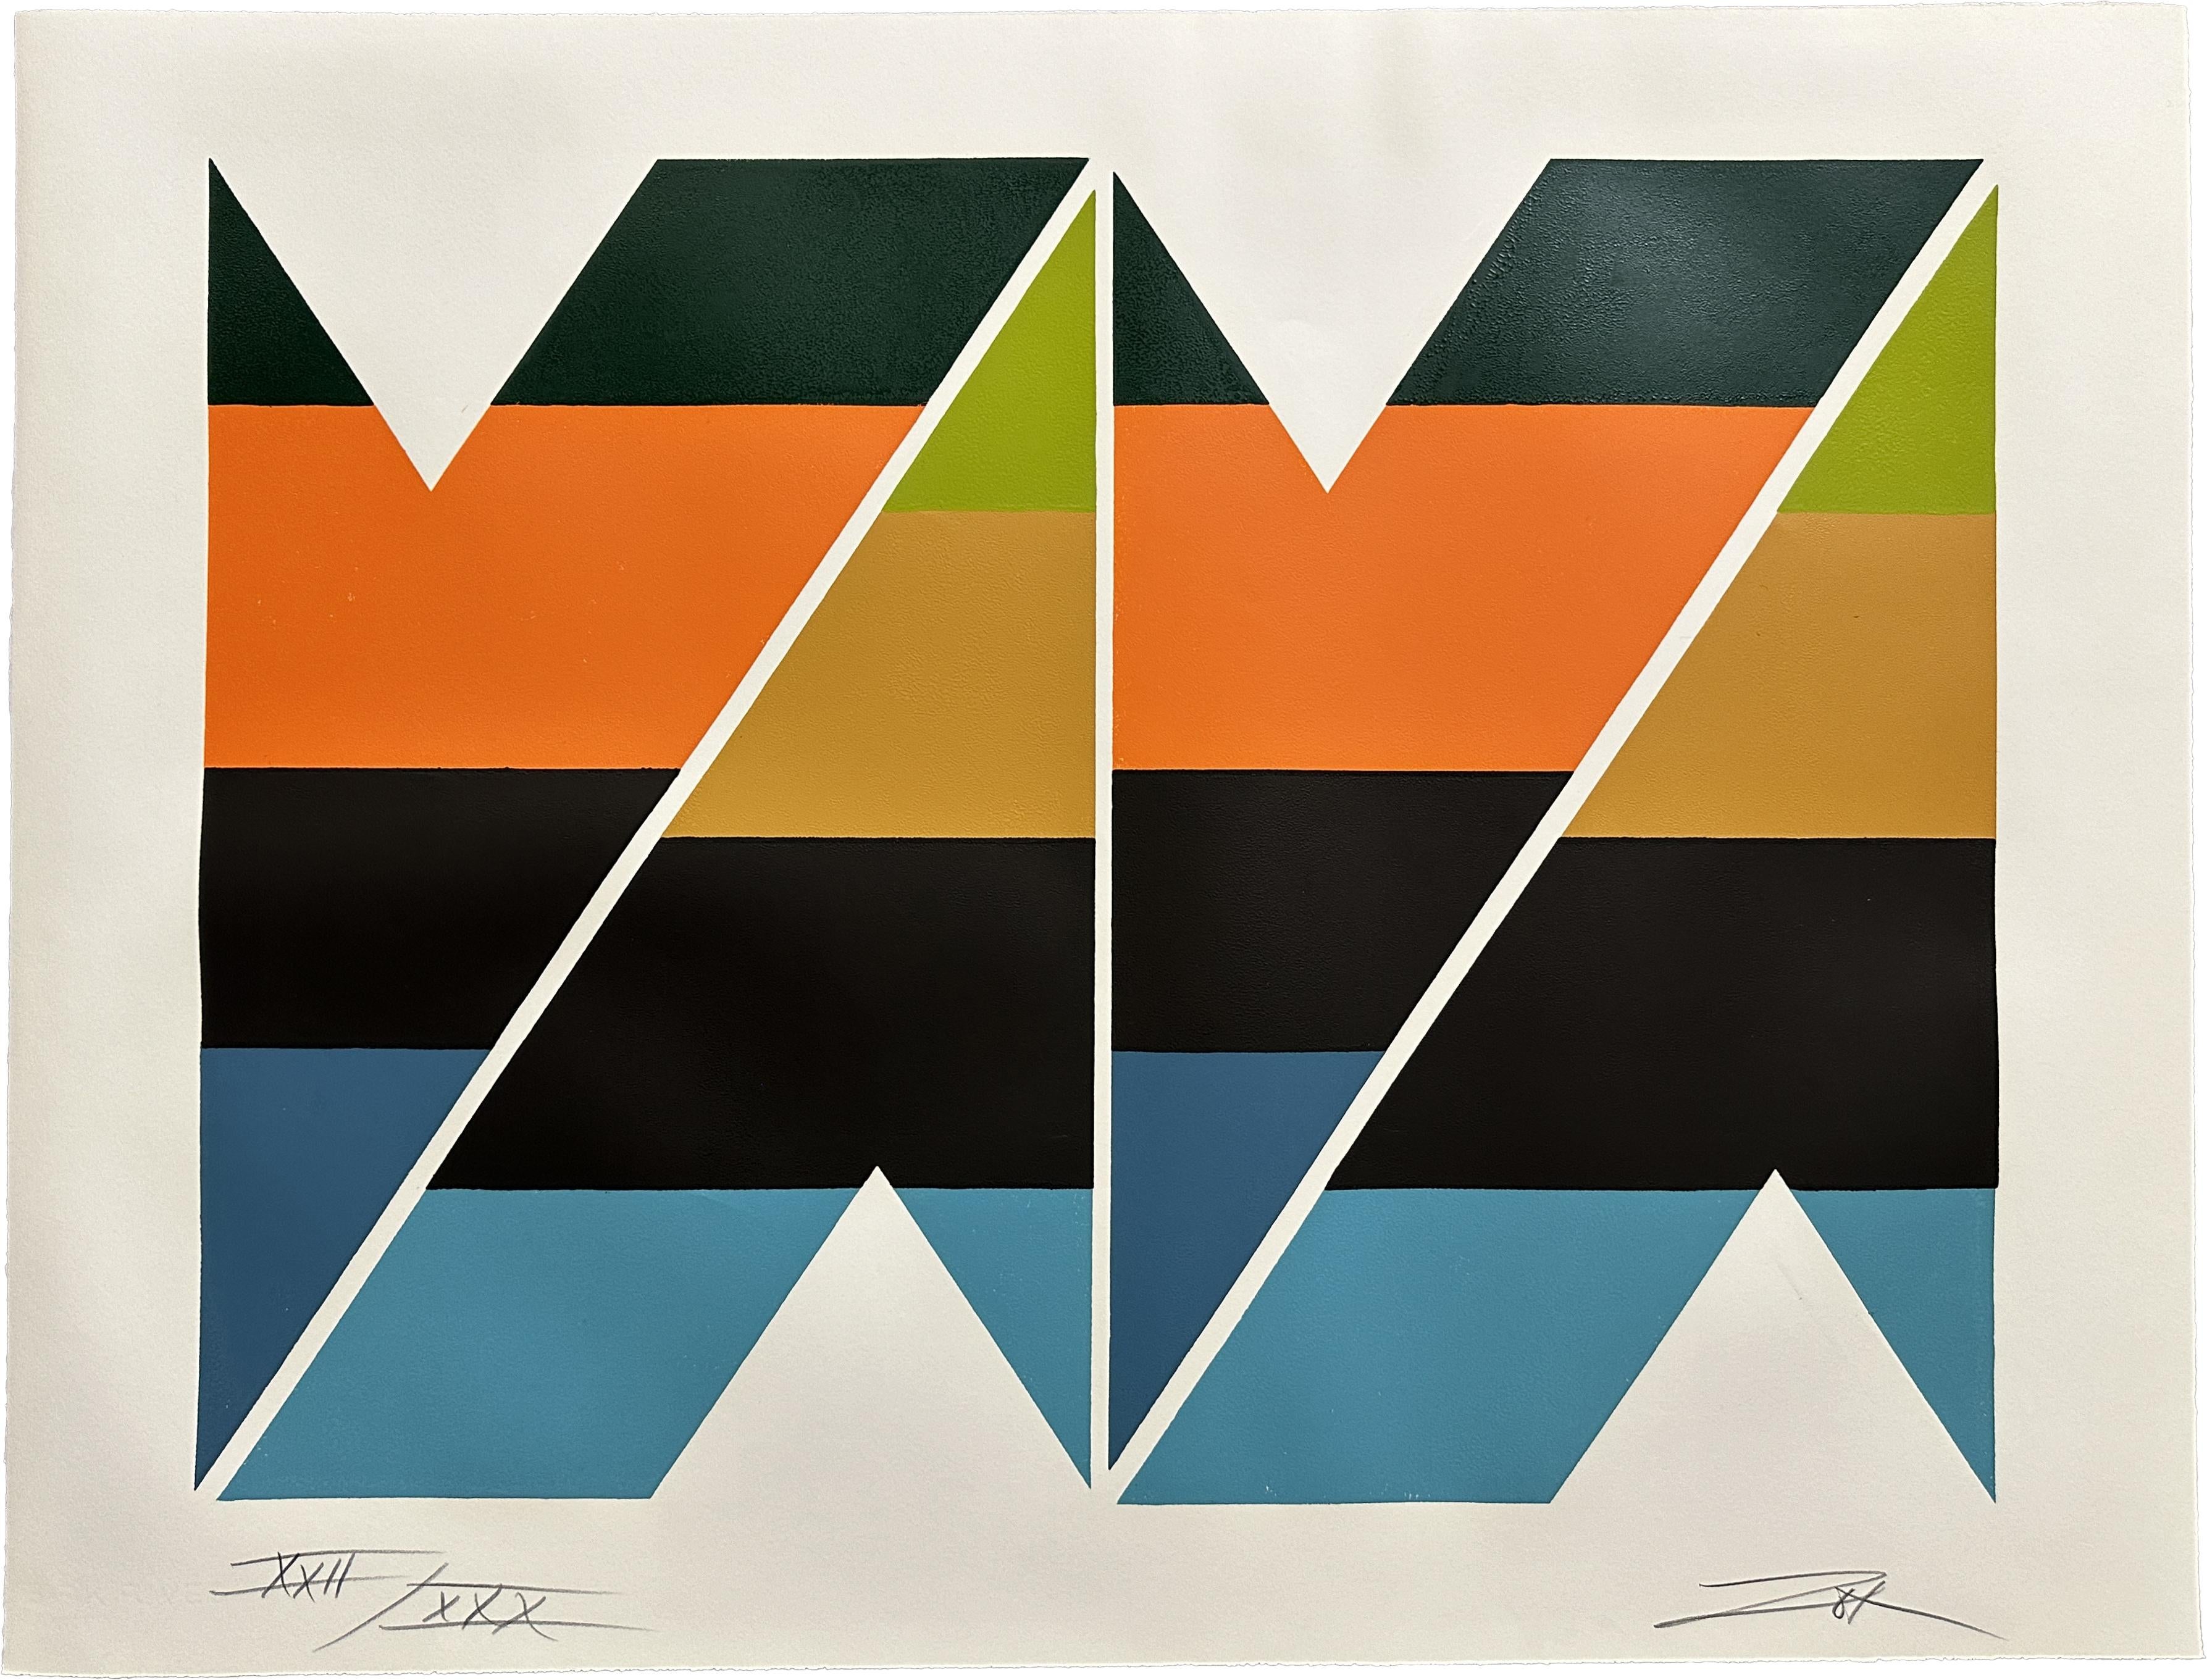 Larry Zox Abstract Print - Scissors Jack Series 1978 Two Signed Limited Edition Screen Prints 